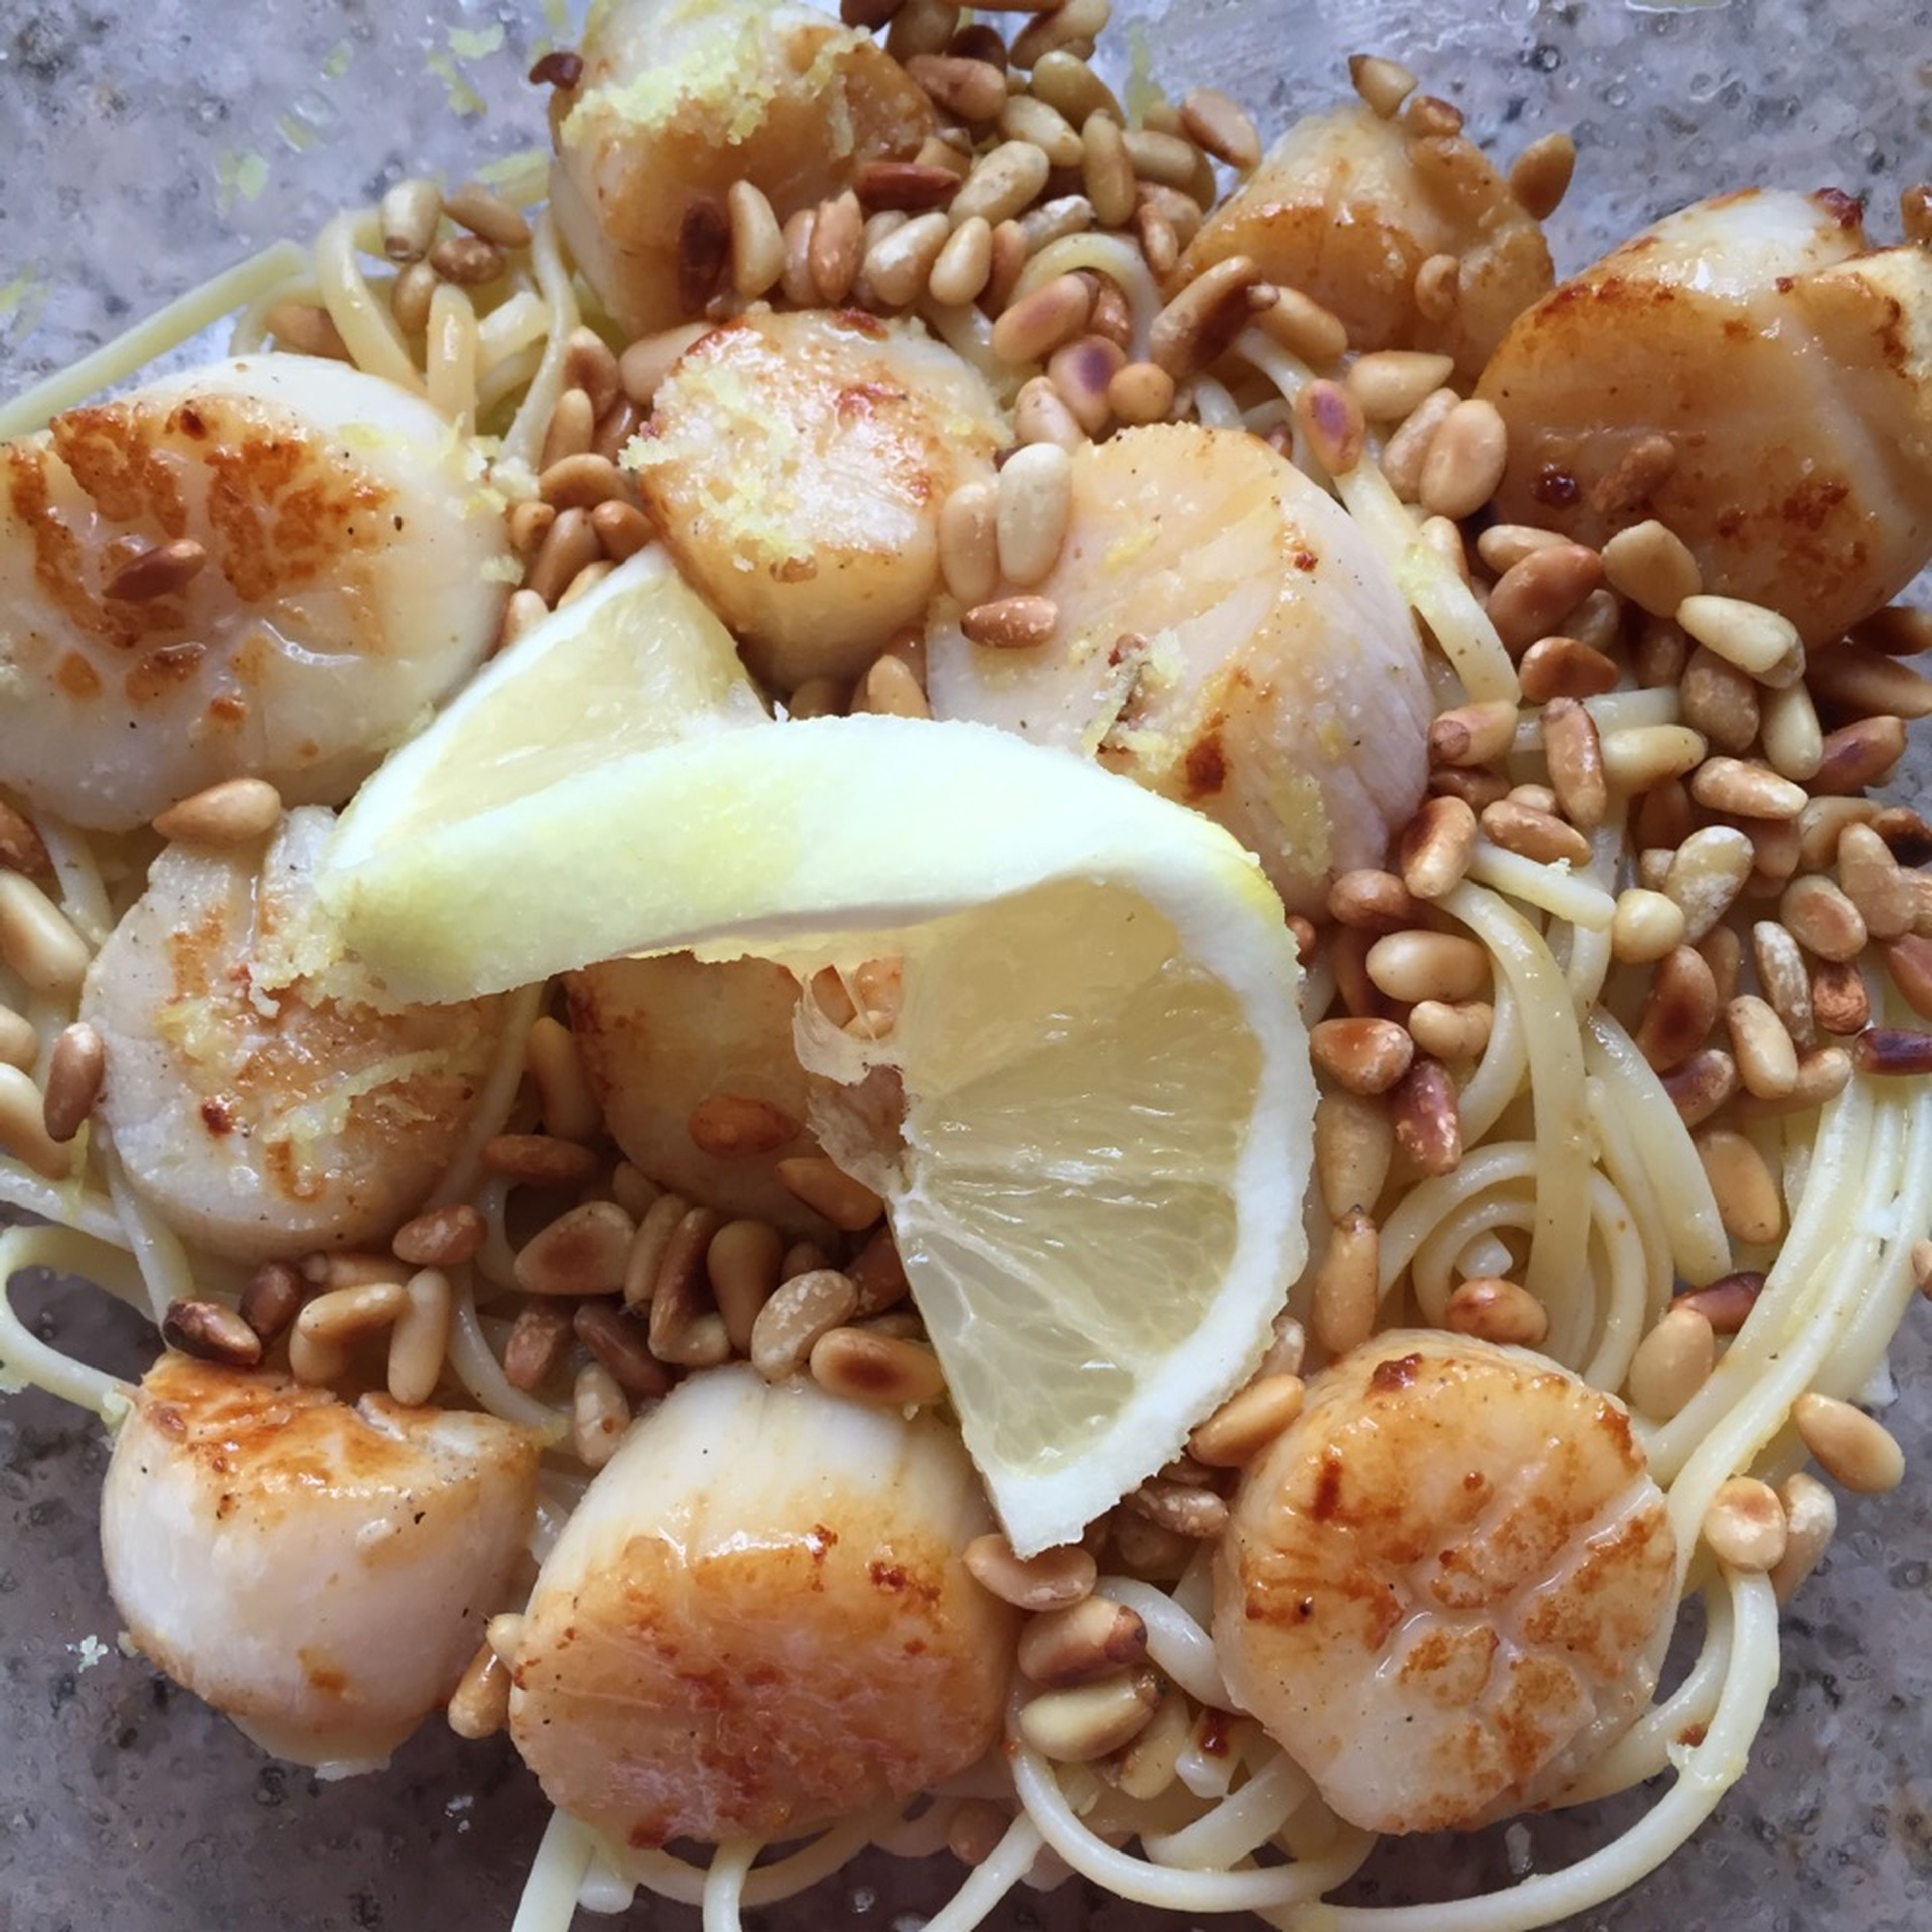 Mix the hot pasta with the with lemon-oil mixture. Serve with pine nuts, basil, and scallops. Enjoy!